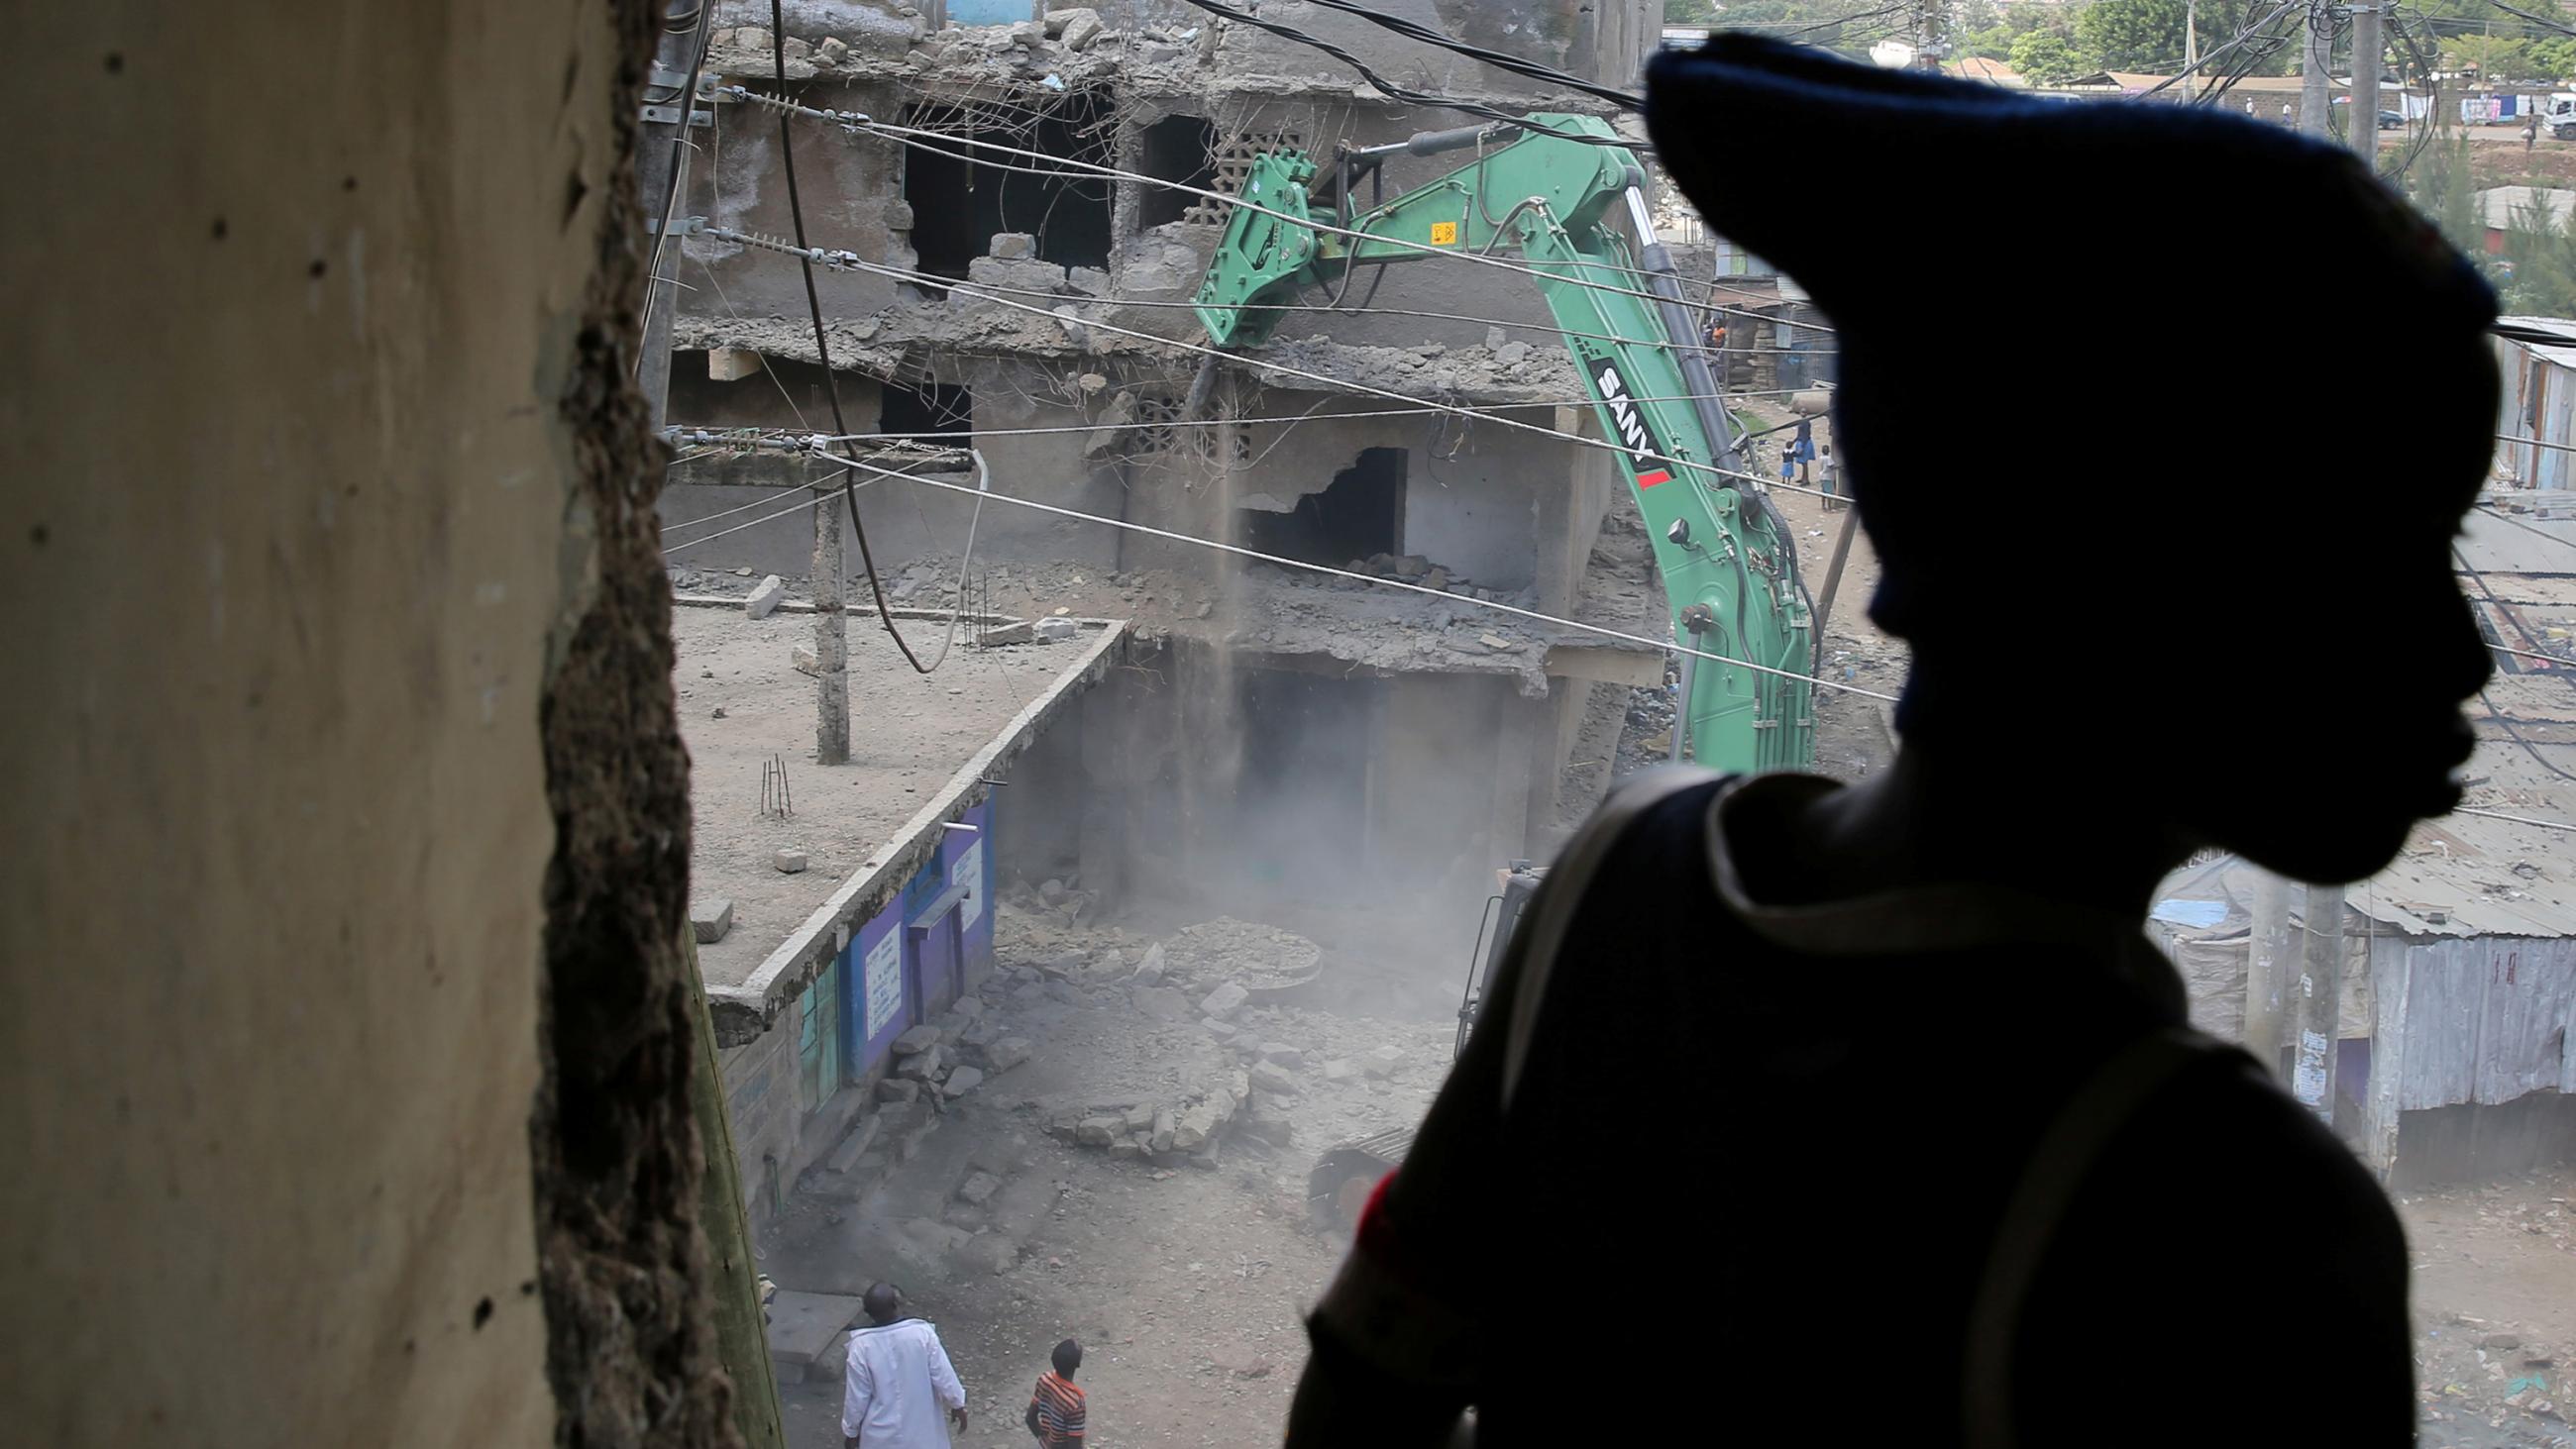 Image shows a building being torn down while the boy watches. He is silhouetted in the foreground. 